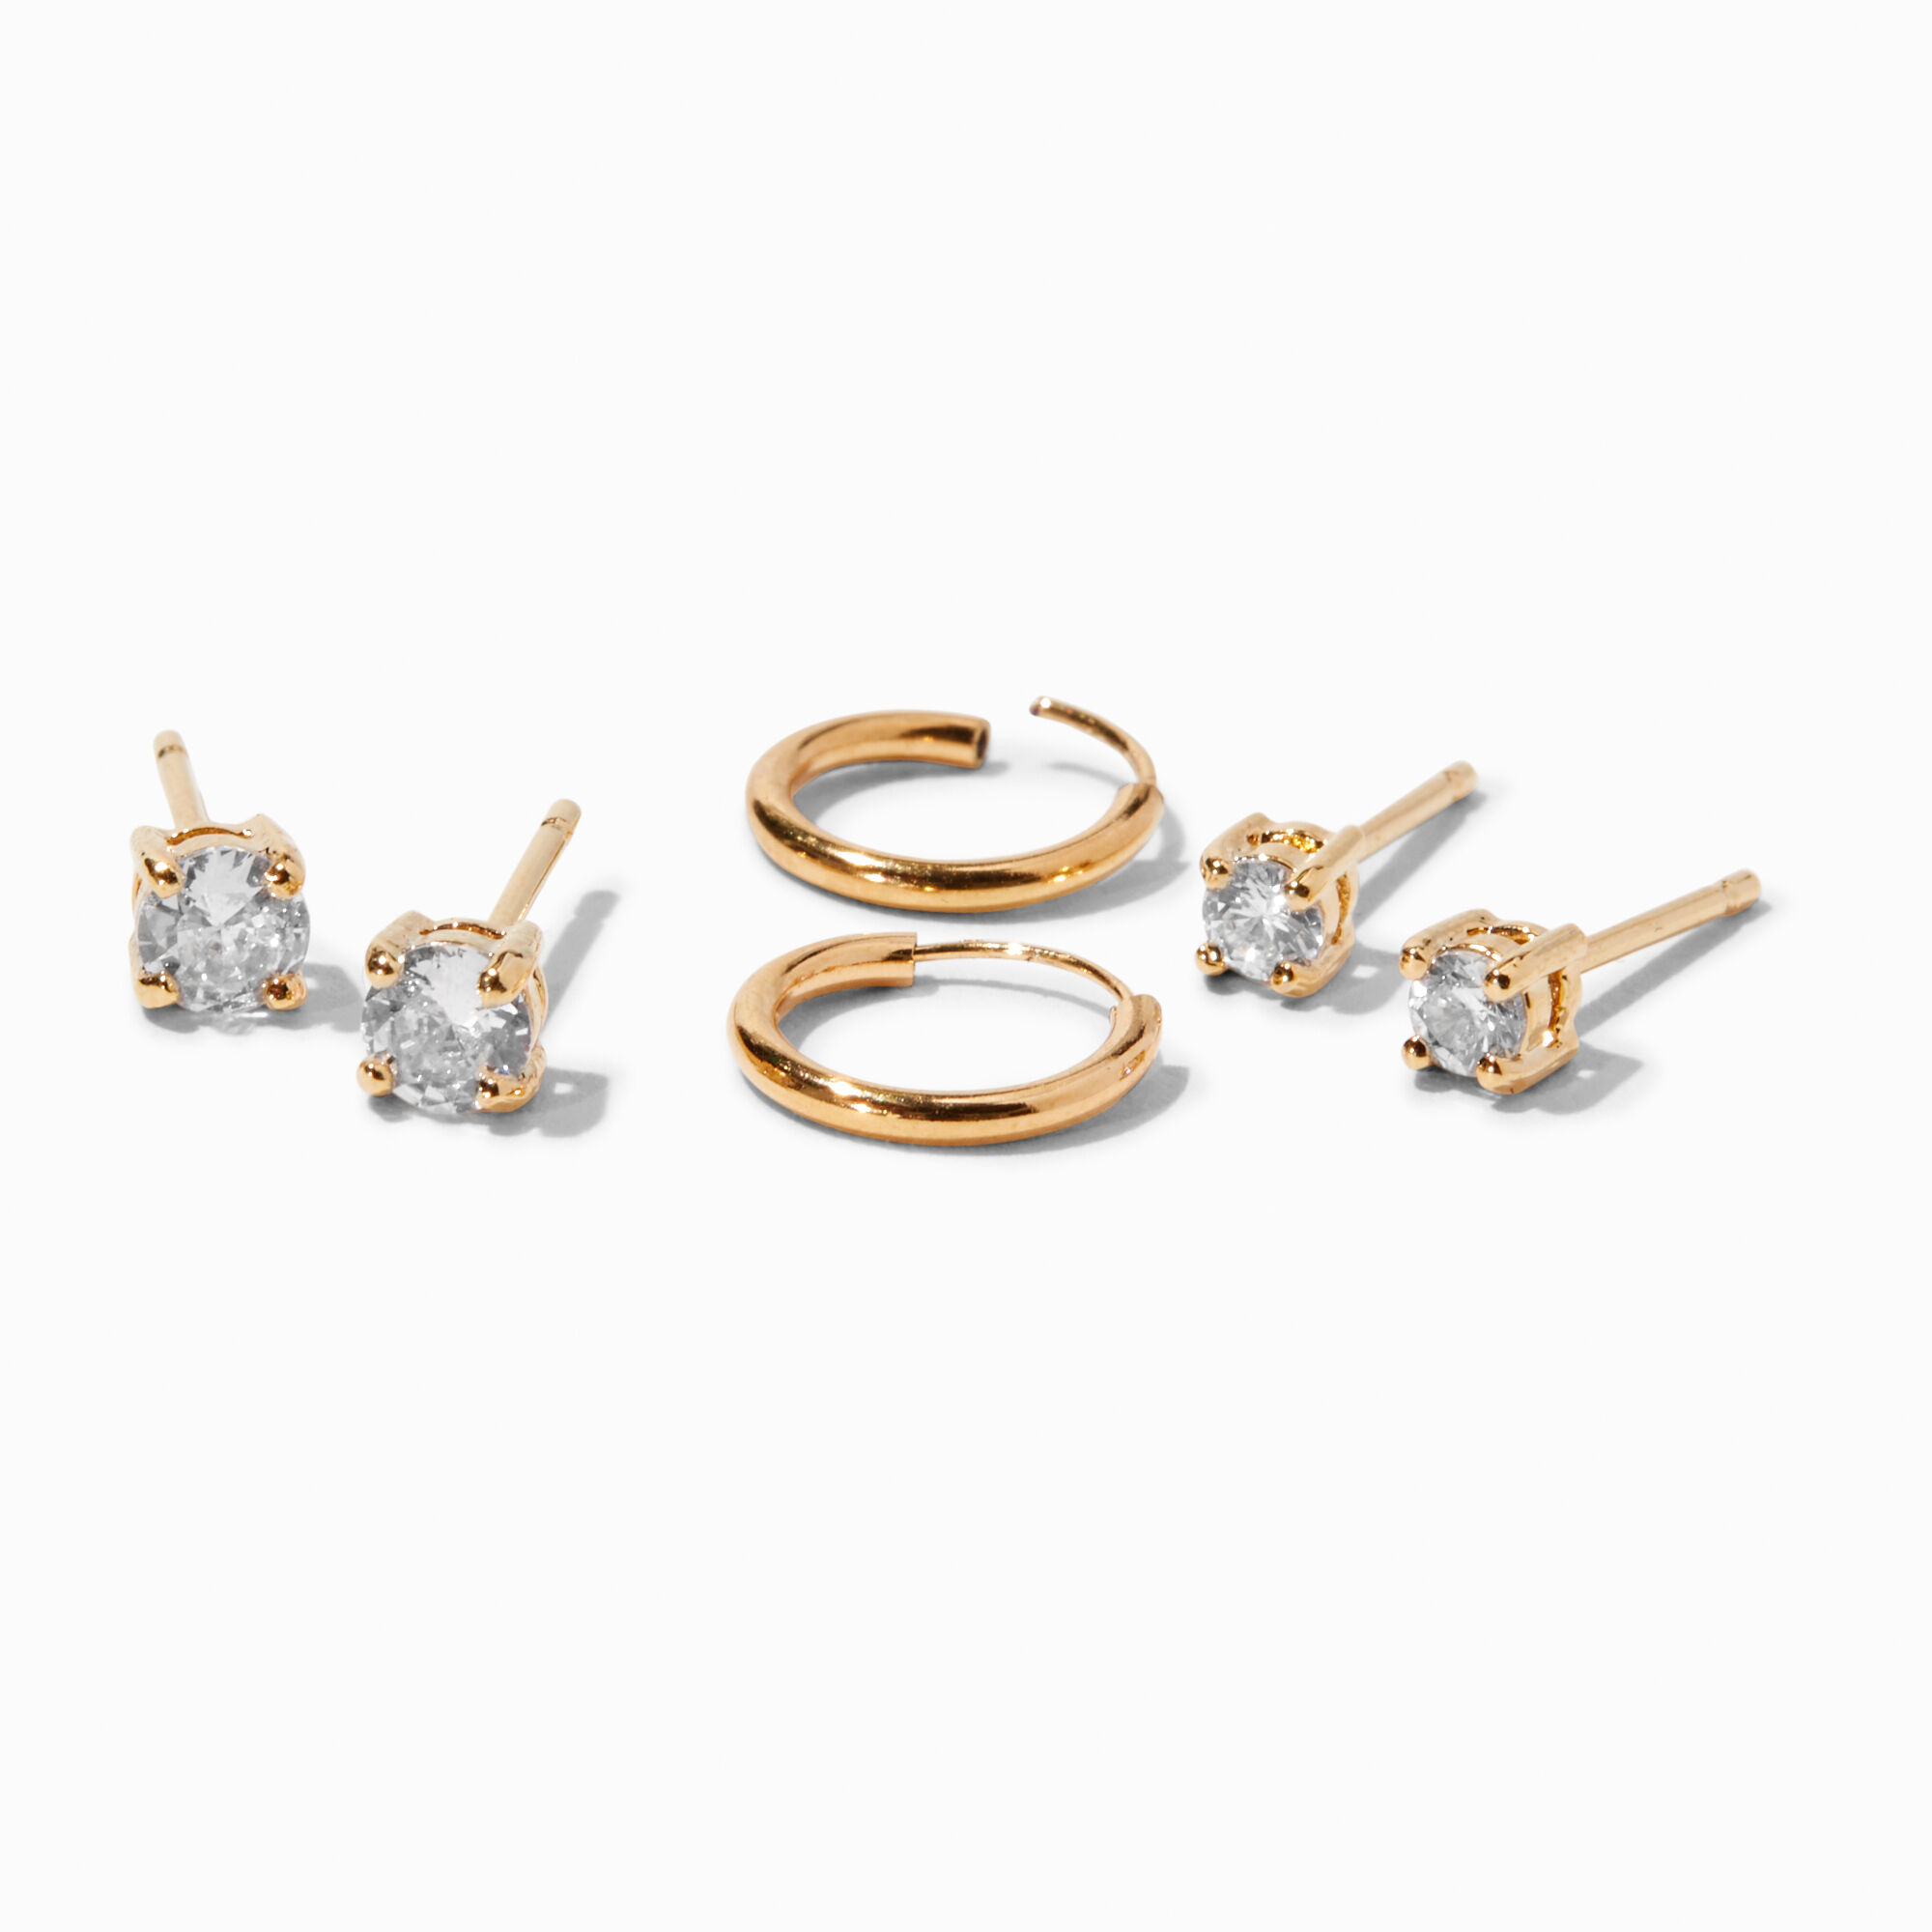 View Claires 18K Plated Cubic Zirconia Stud Hoop Earring Set 3 Pack Gold information